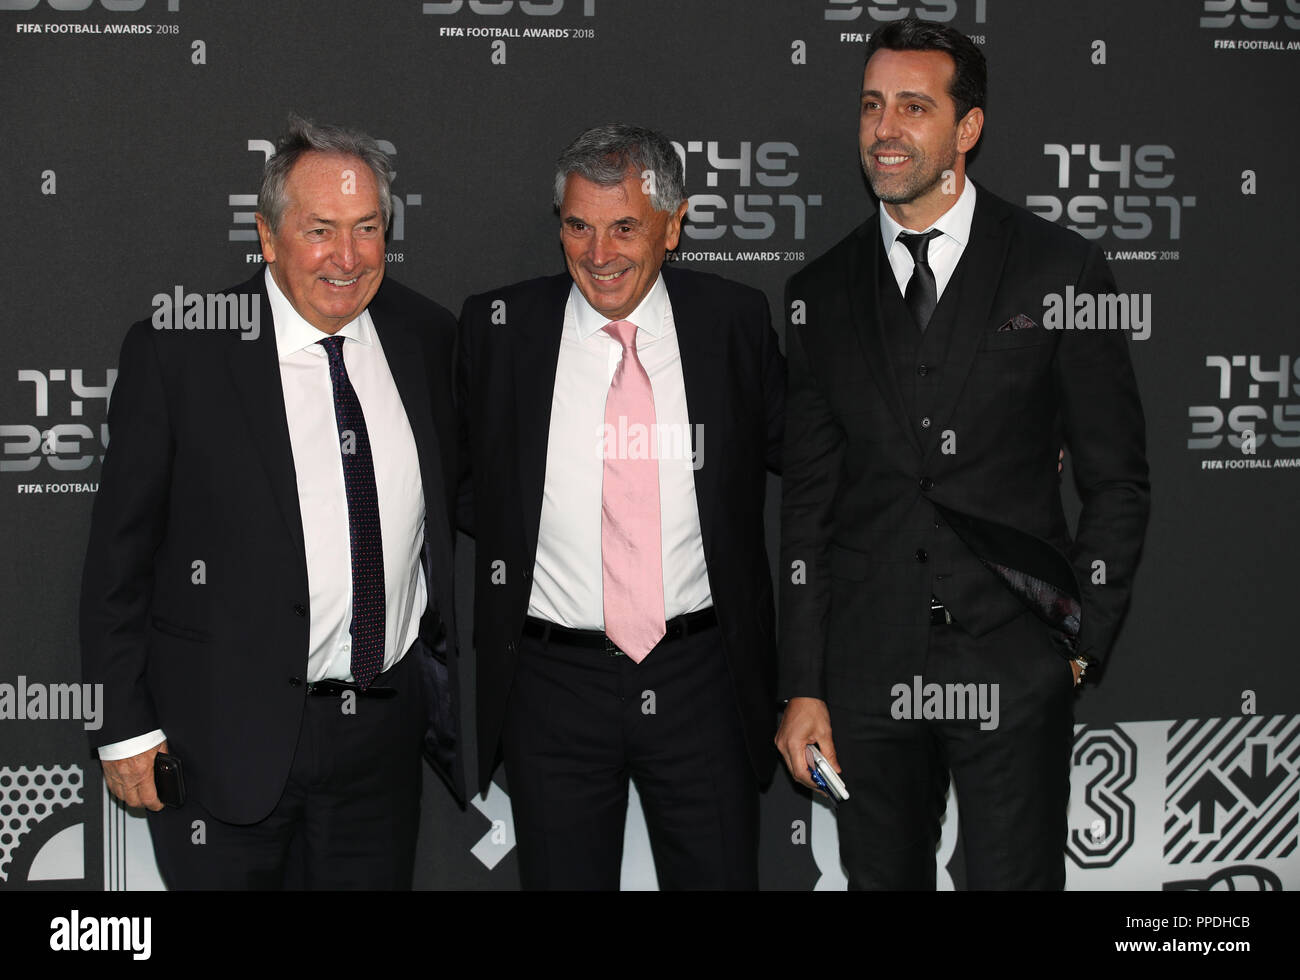 Gerard Houllier (left), David Dein (centre) and Edu Gaspar the Best FIFA Football Awards 2018 at the Royal Festival Hall, London. PRESS ASSOCIATION Photo. Picture date: Monday September 24, 2018. See PA story SOCCER Awards. Photo credit should read: Tim Goode/PA Wire Stock Photo